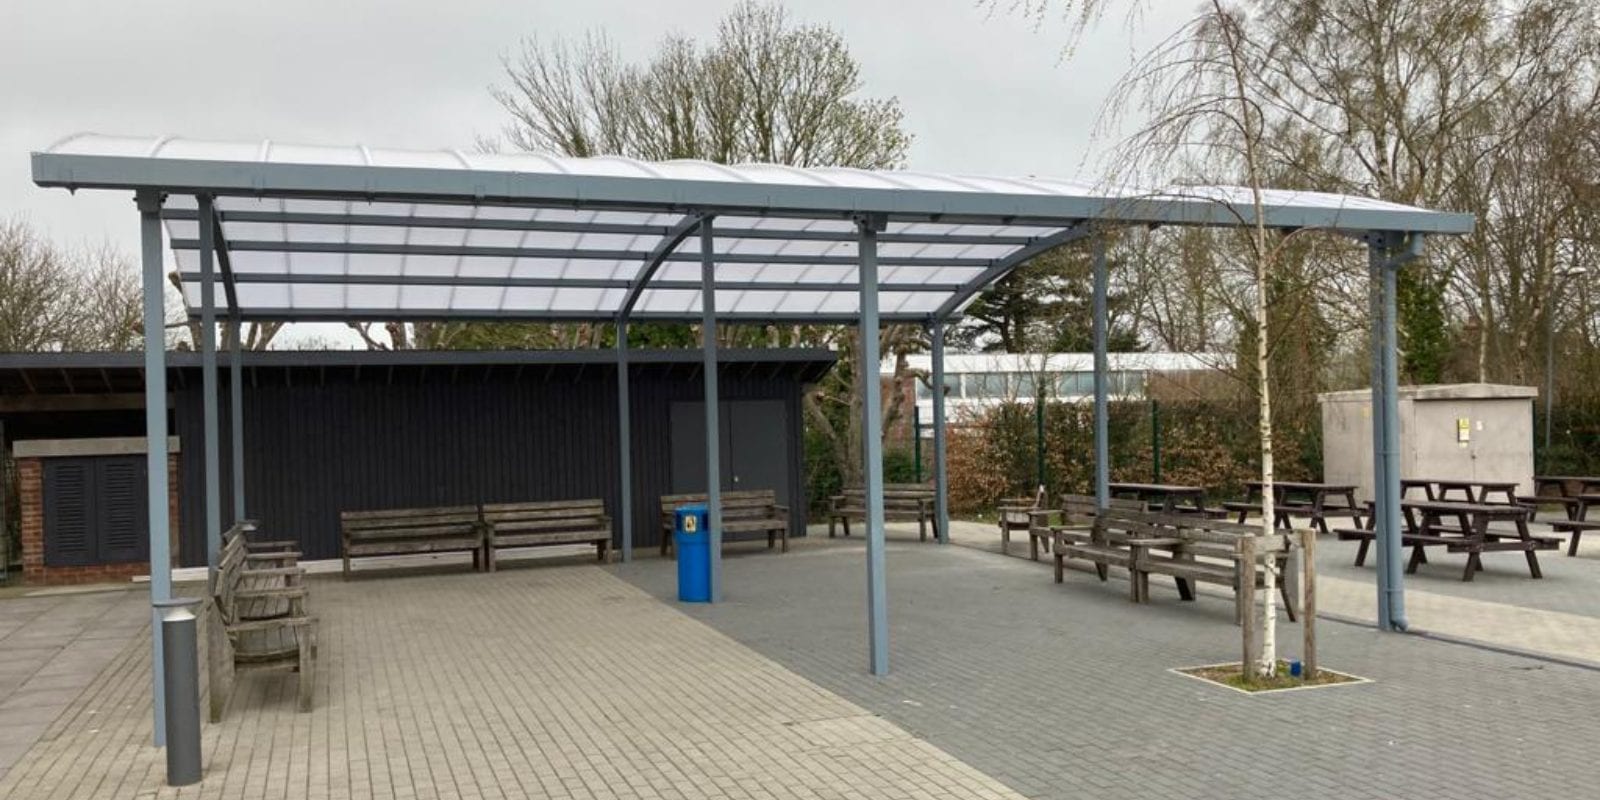 Dining canopy we designed for Wye School